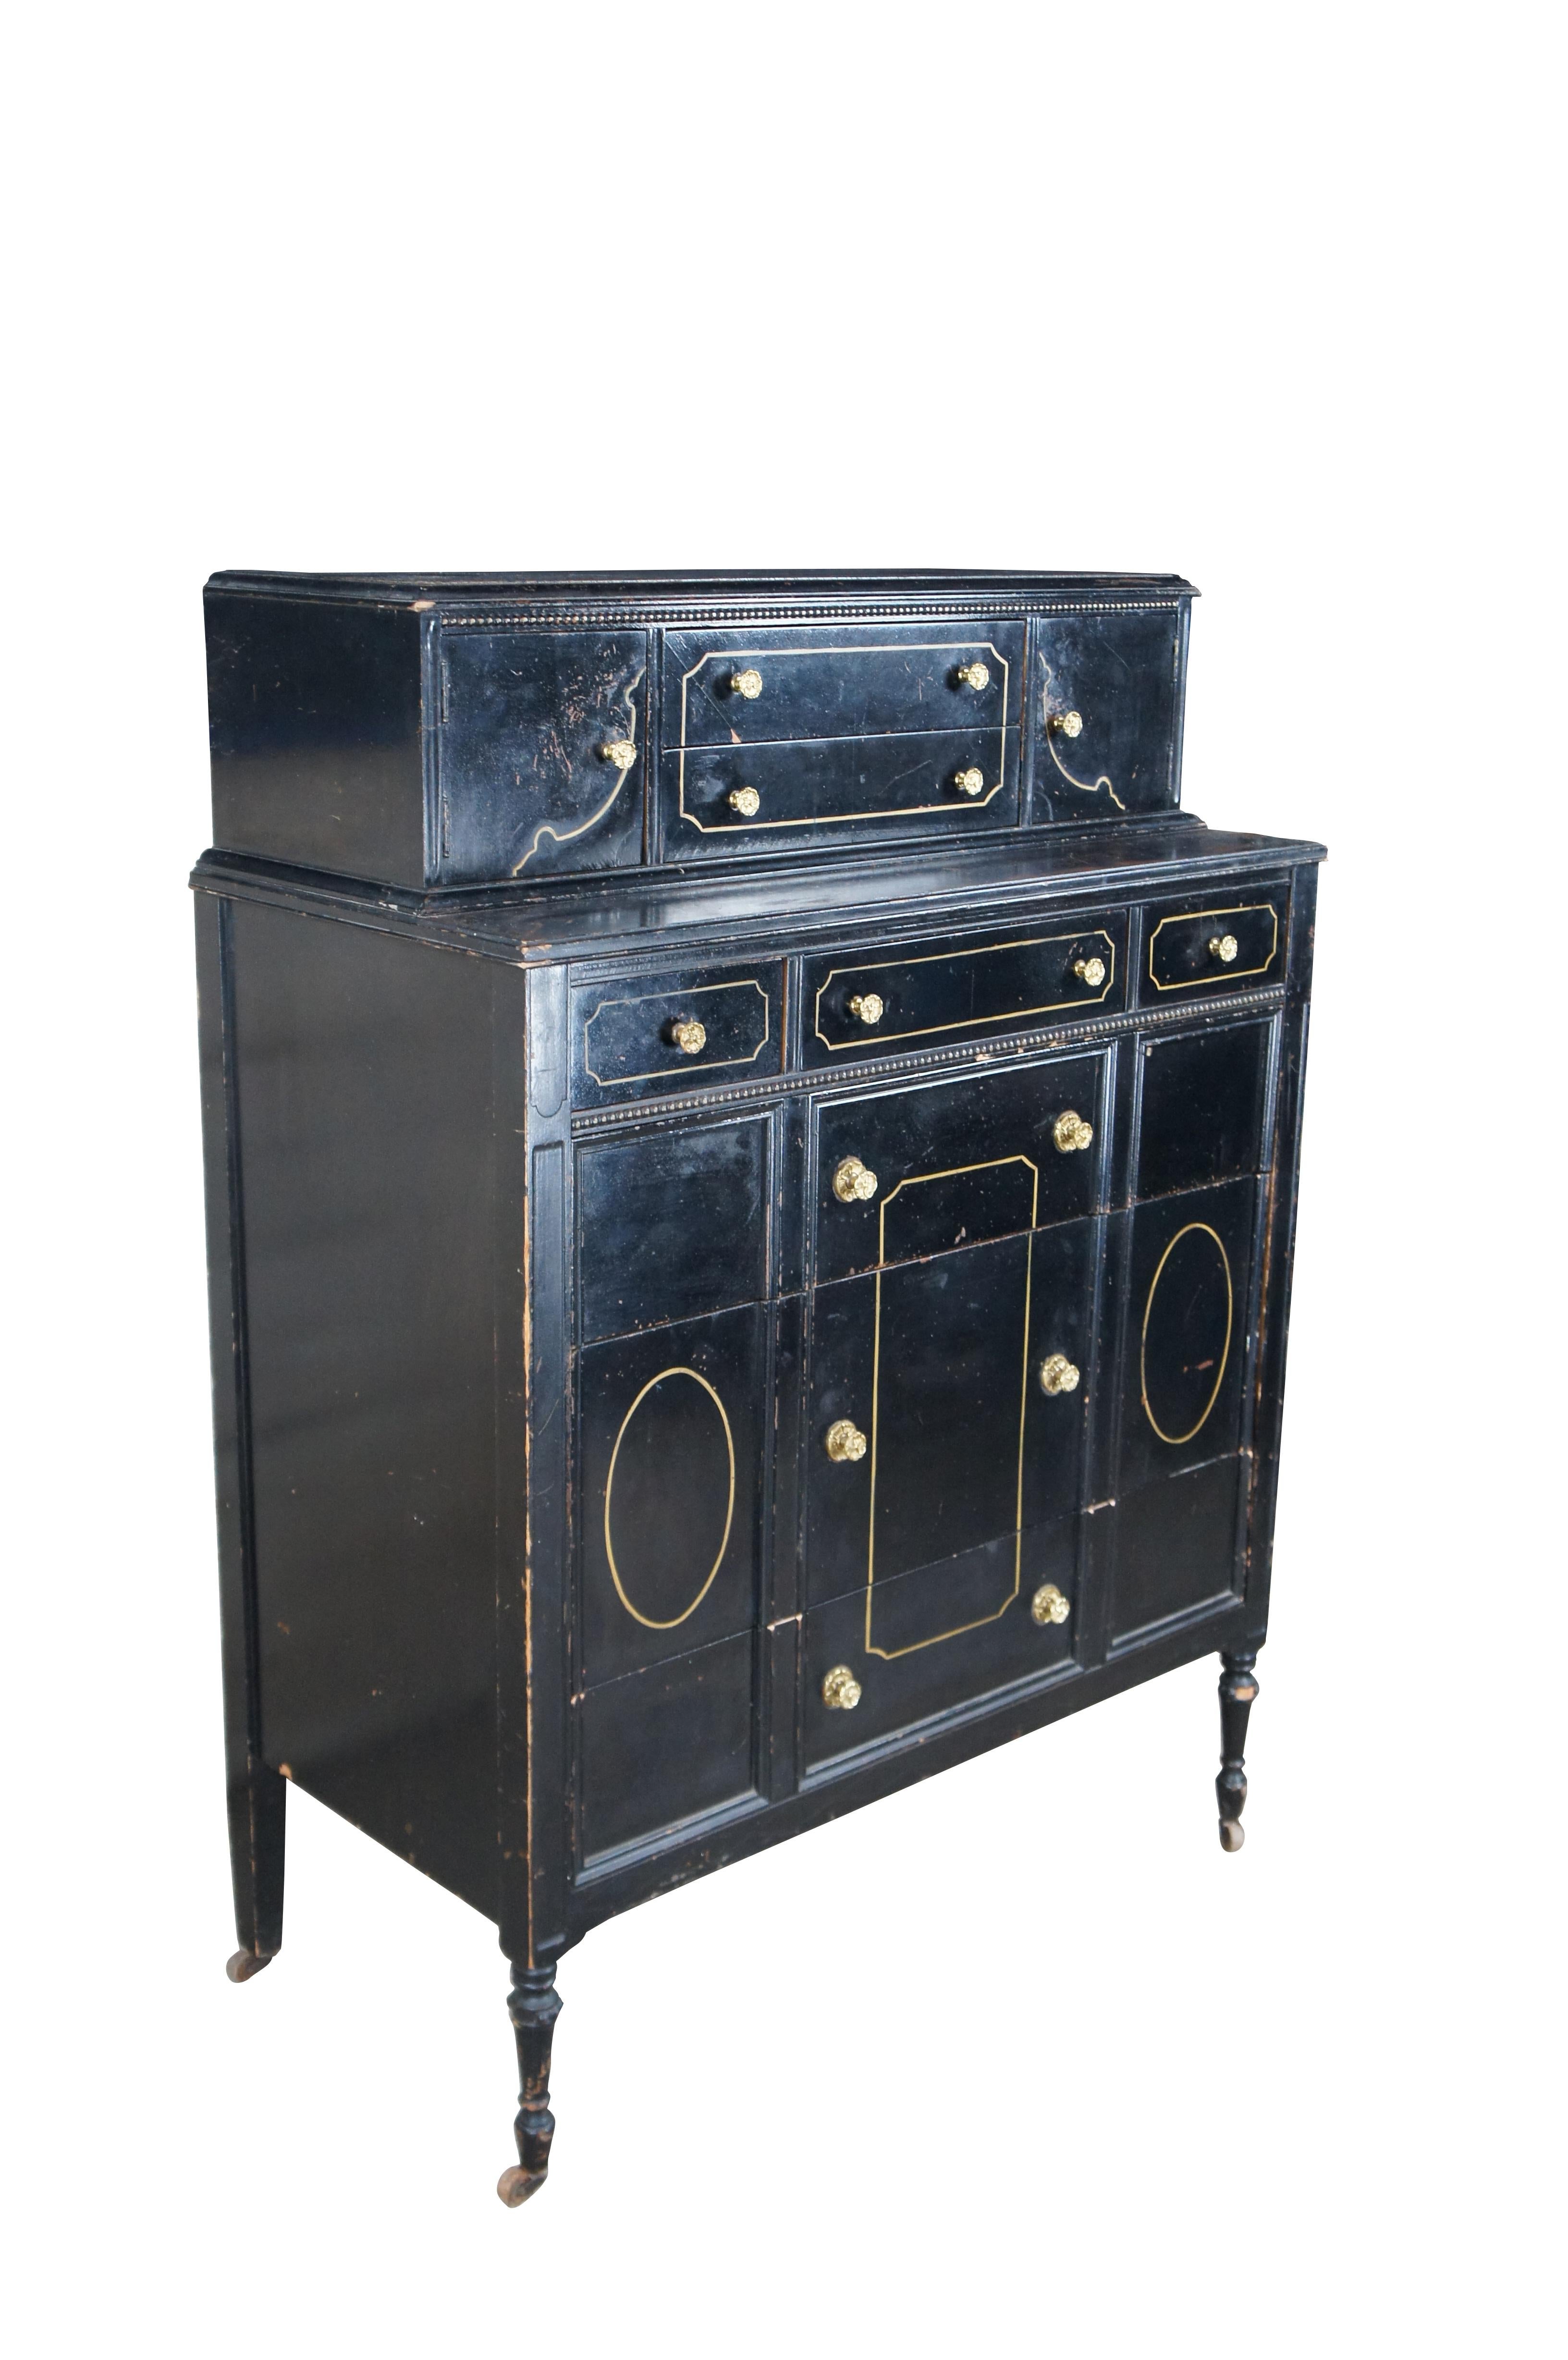 Late Victorian style mahogany painted tall boy chest. Finished in black with gold painted accents. Features four dovetailed drawers and a stepback top with two smaller central drawers flanked by outer cabinets. The drawers / cabinets have gold